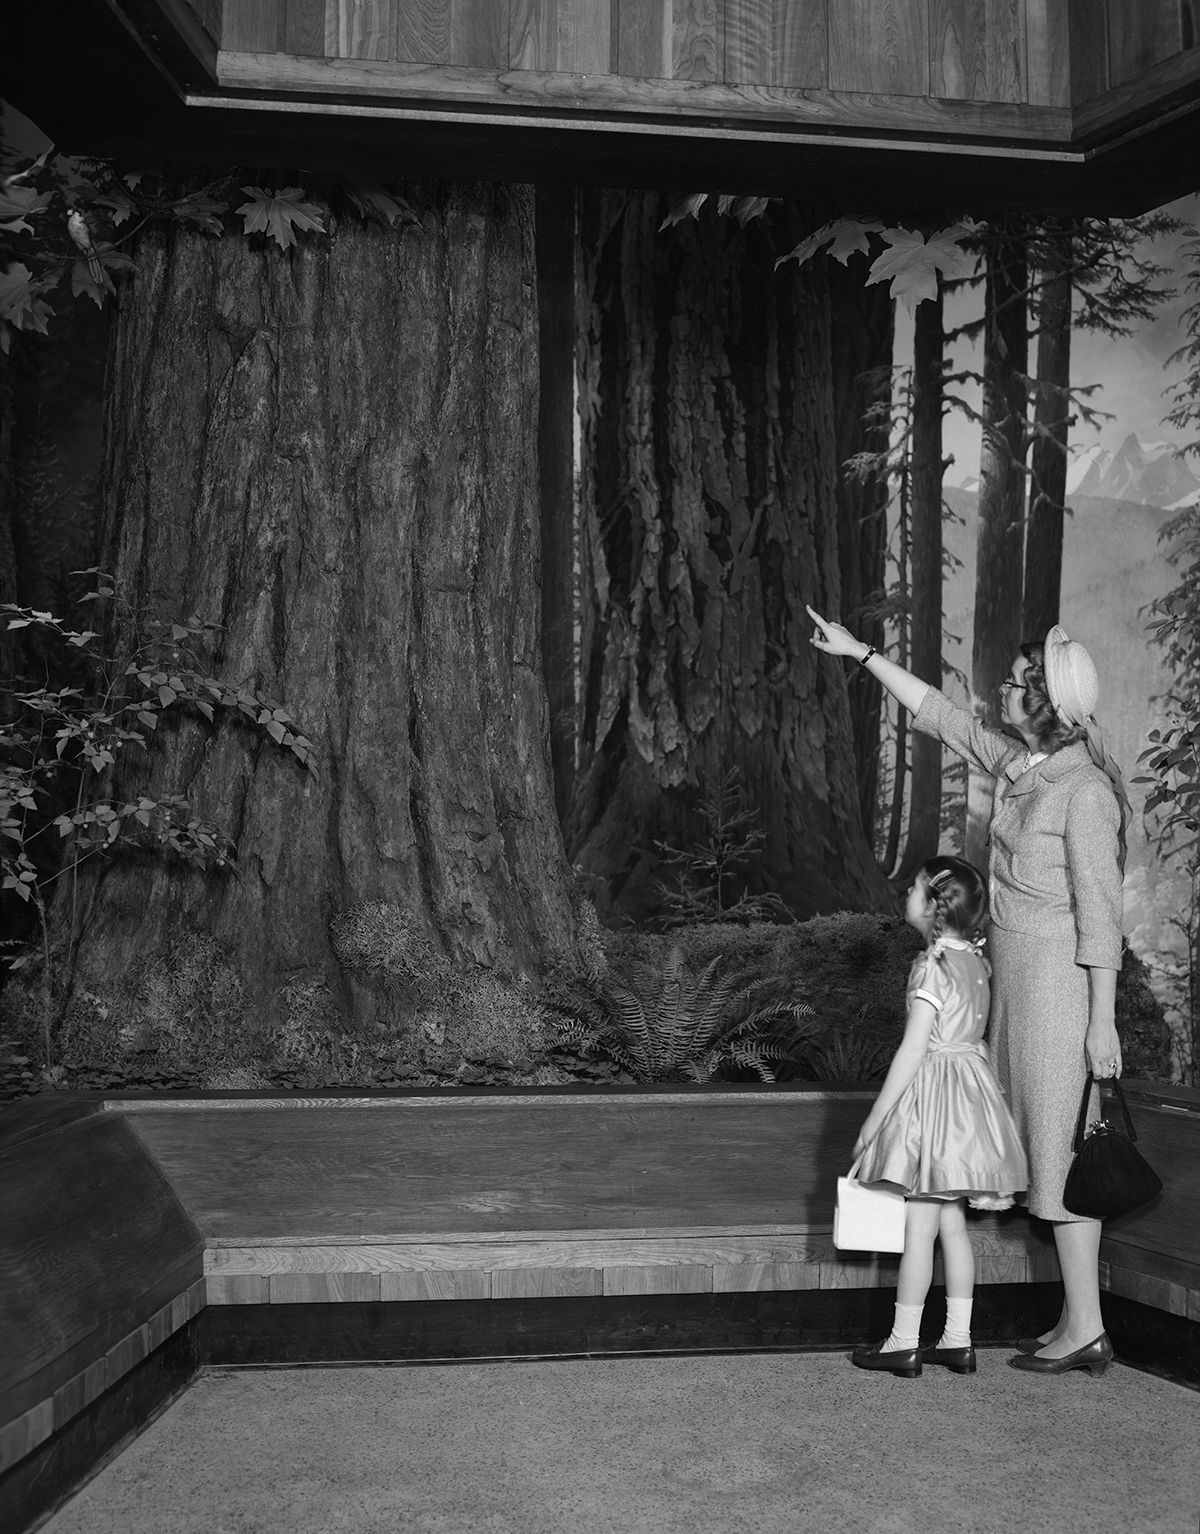 A woman standing with a young girl points to large tree trunks in a nature diorama.